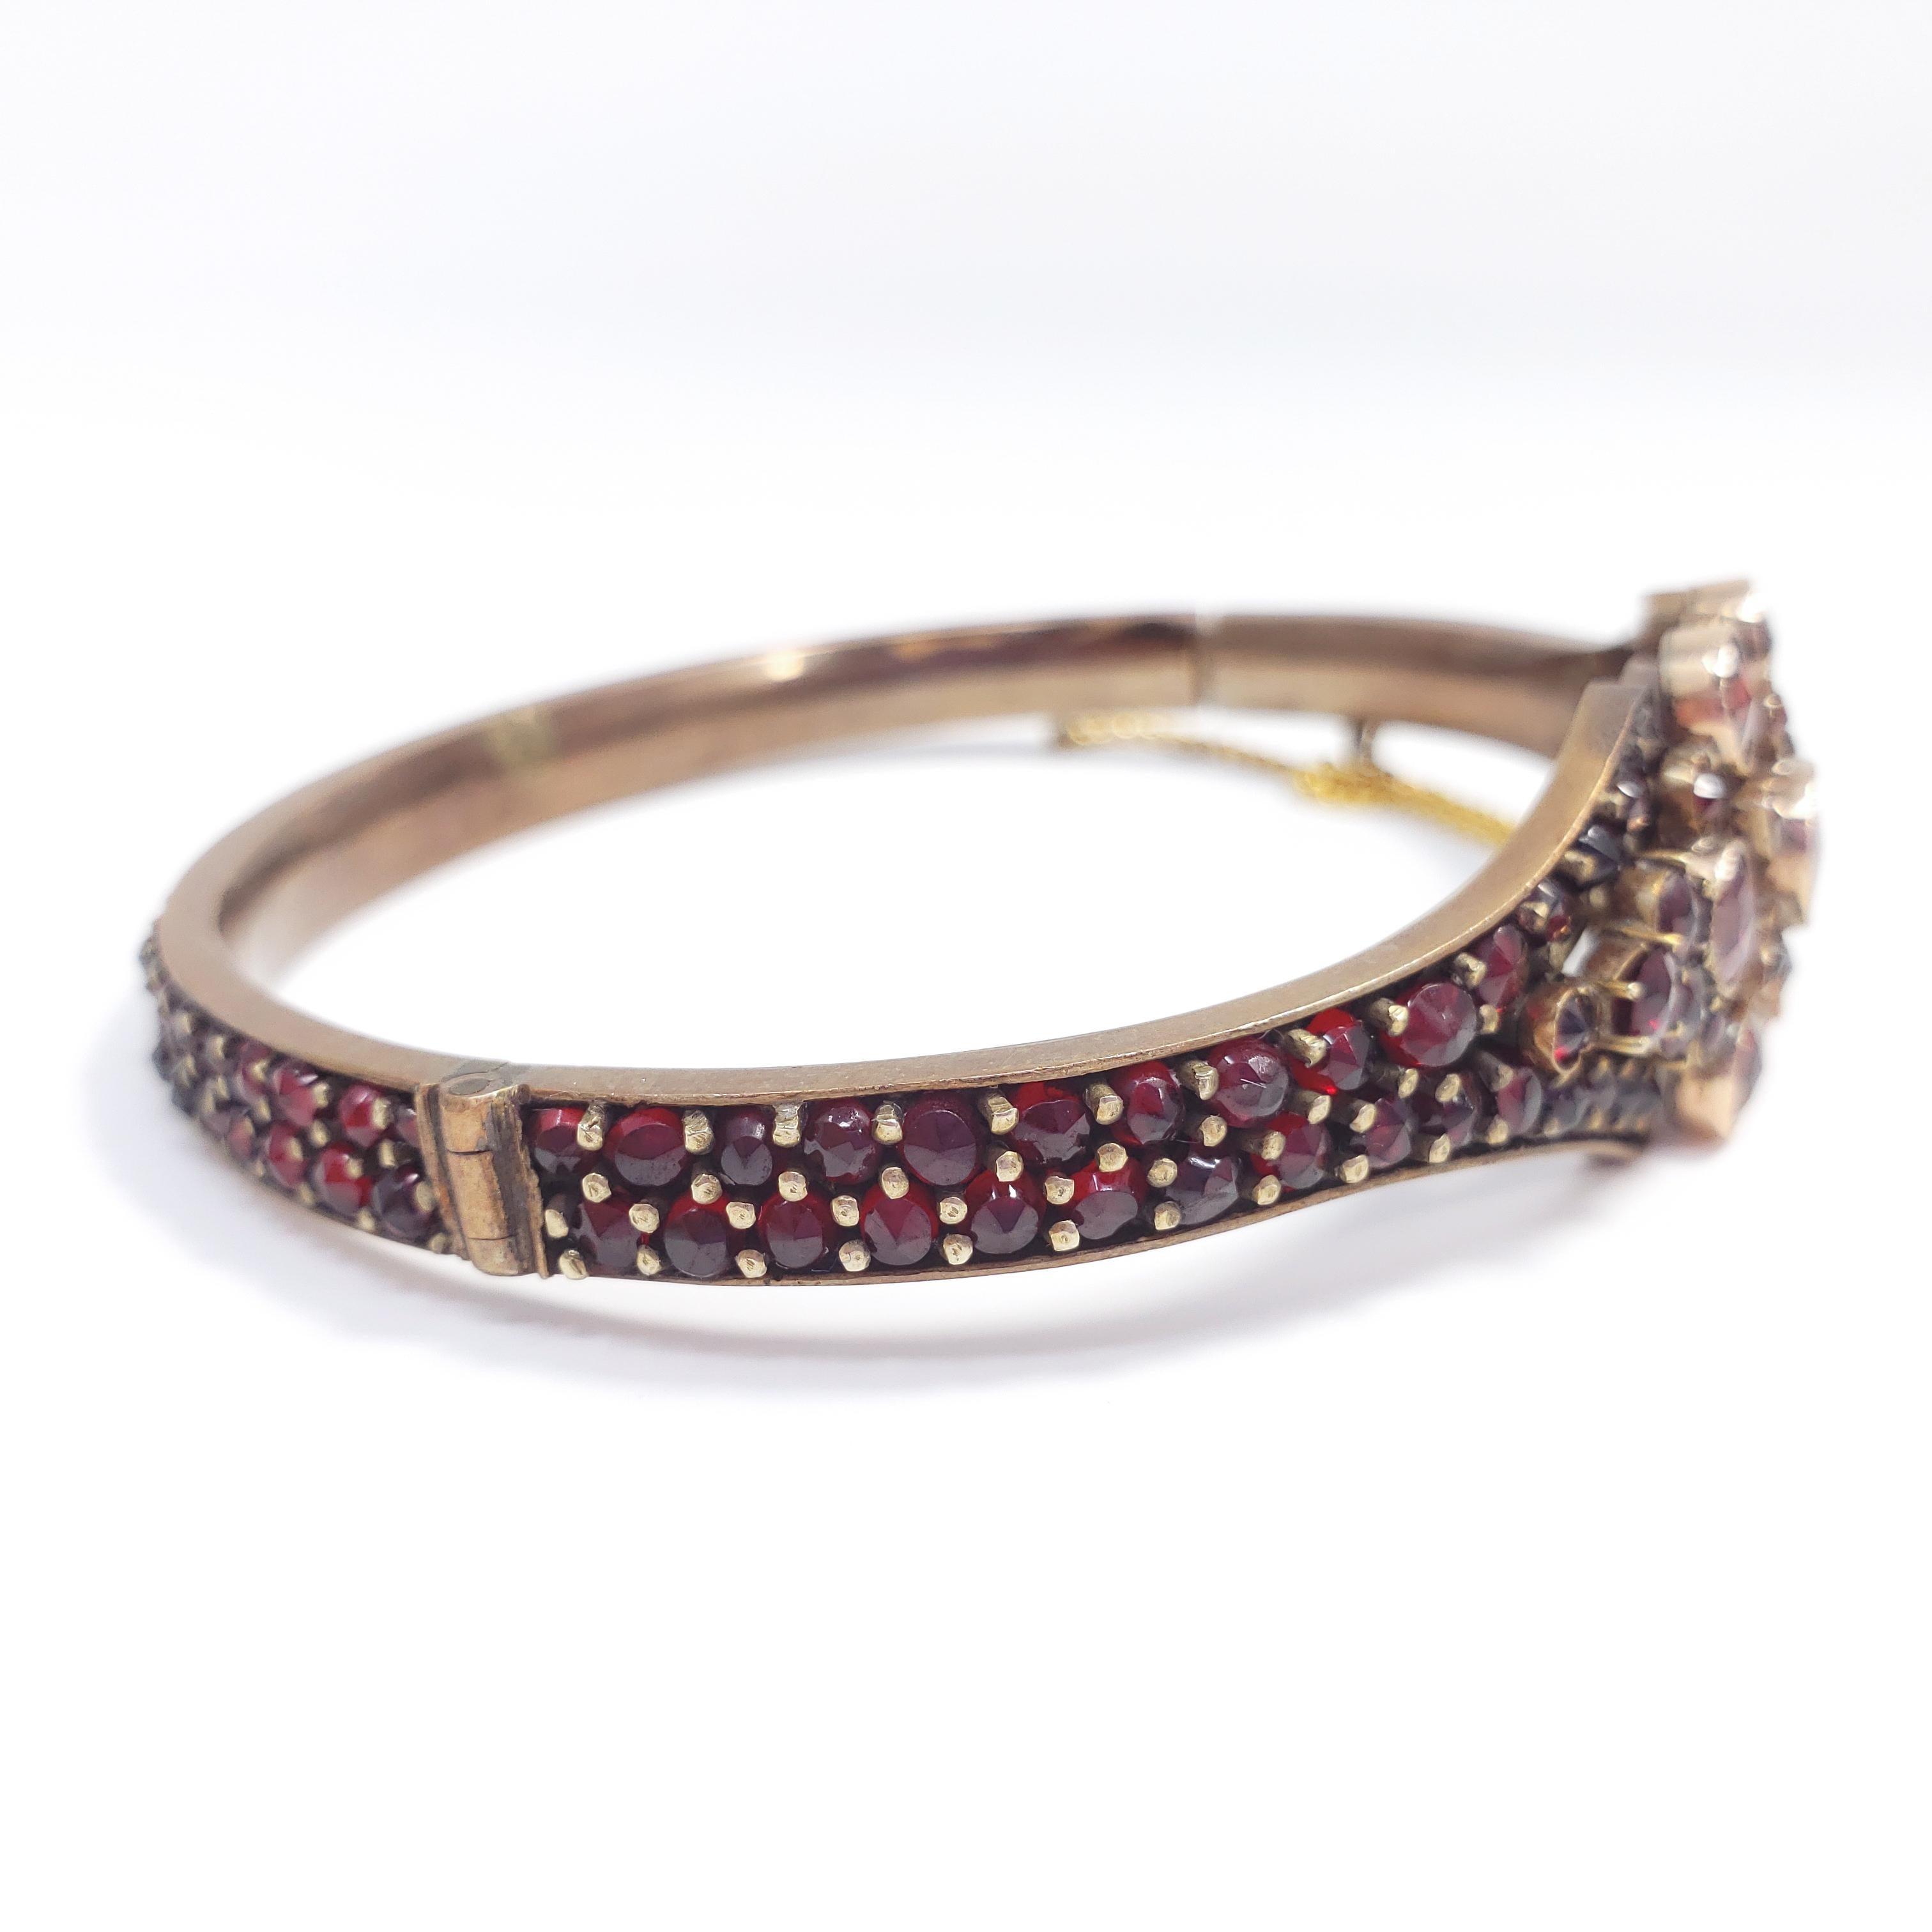 Antique Victorian Pave Garnet Hinged Bangle Bracelet in Sterling Silver In Good Condition For Sale In Milford, DE